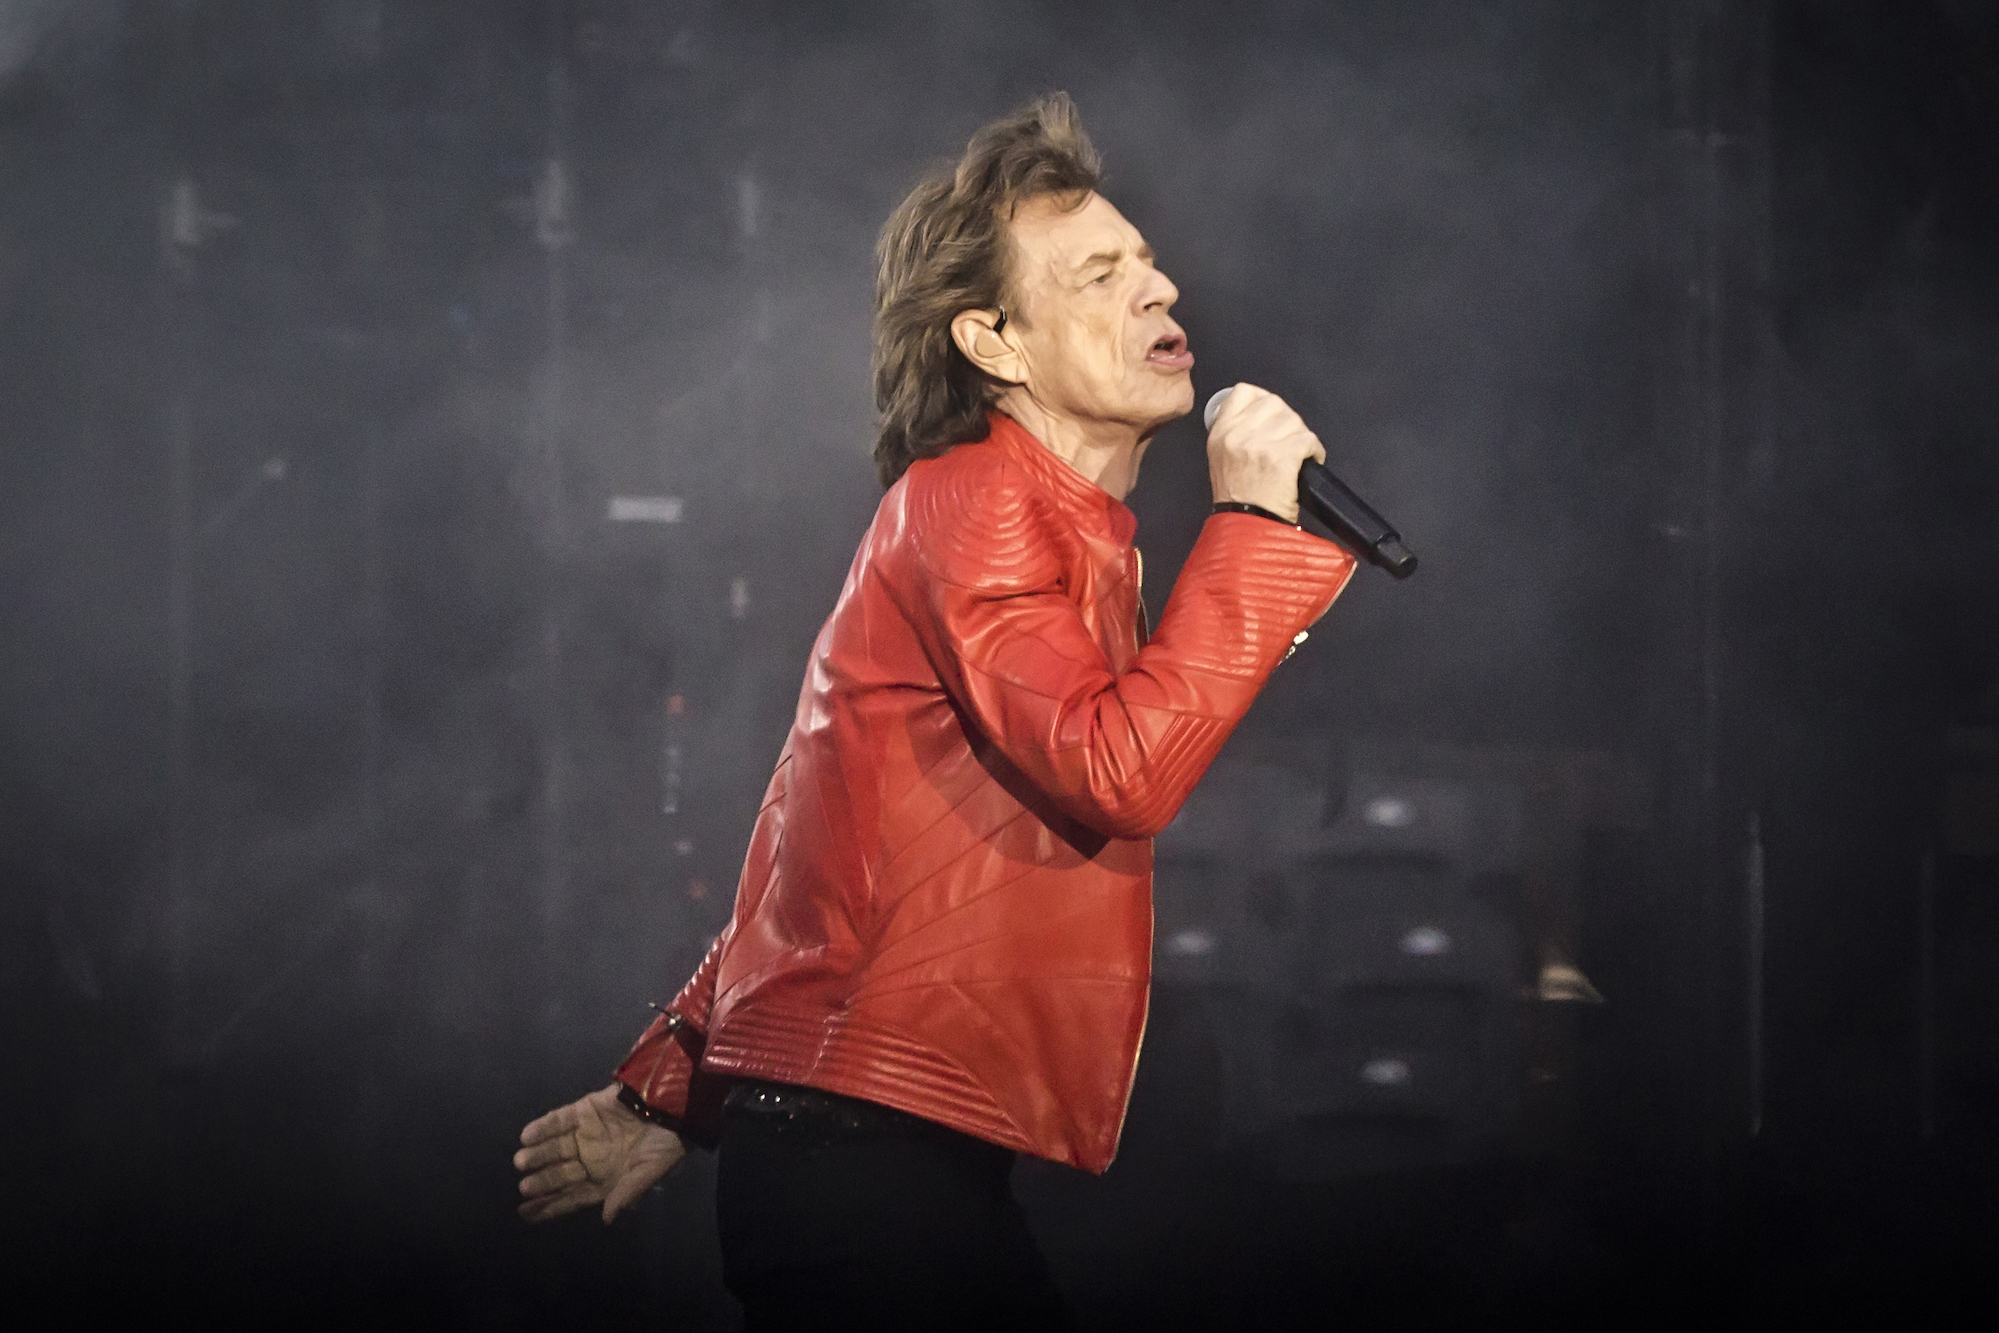 Mick Jagger performs with The Rolling Stones in Berlin, Germany